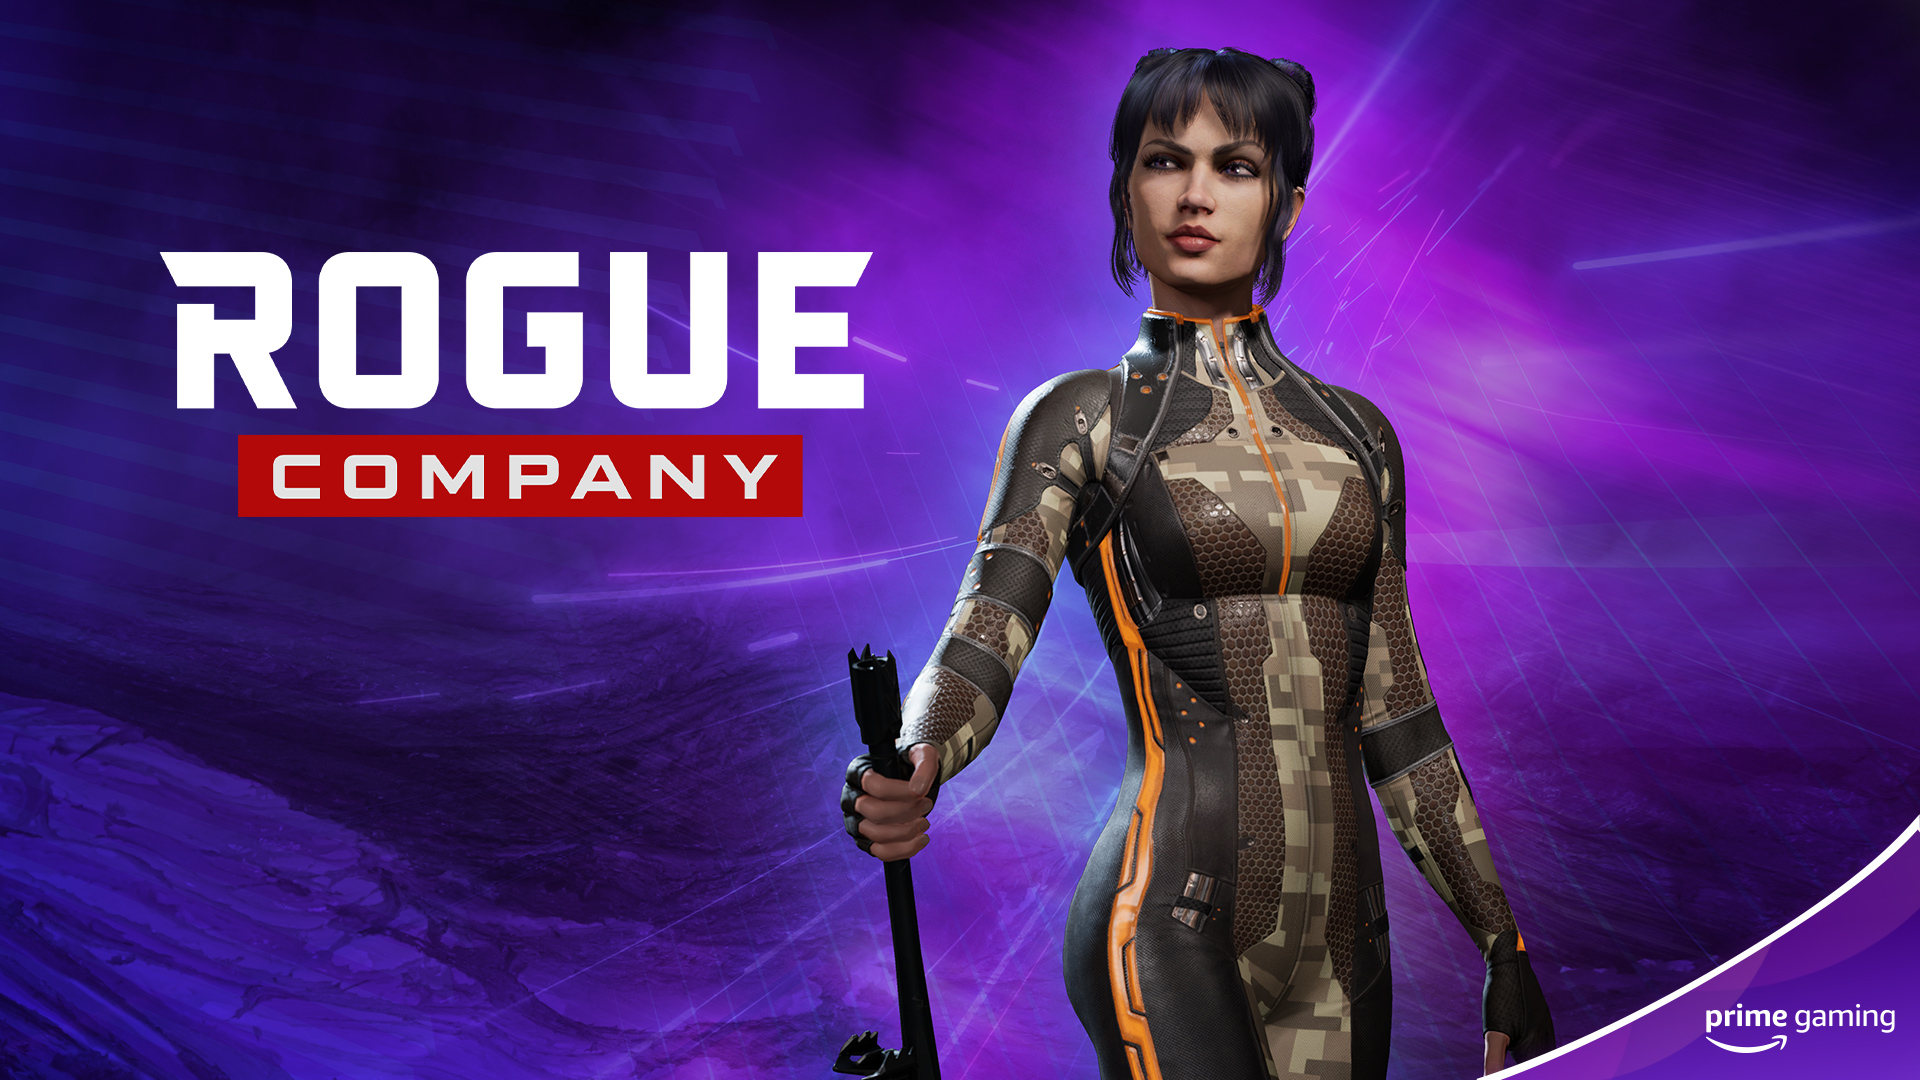 Rogue Company - Ruffle some feathers with our latest Prime Gaming drop: the  Good Migrations Weapon Wrap. 🦜 Prime Gaming members, head over to https:// gaming..com/loot/roguecompany now to claim yours!